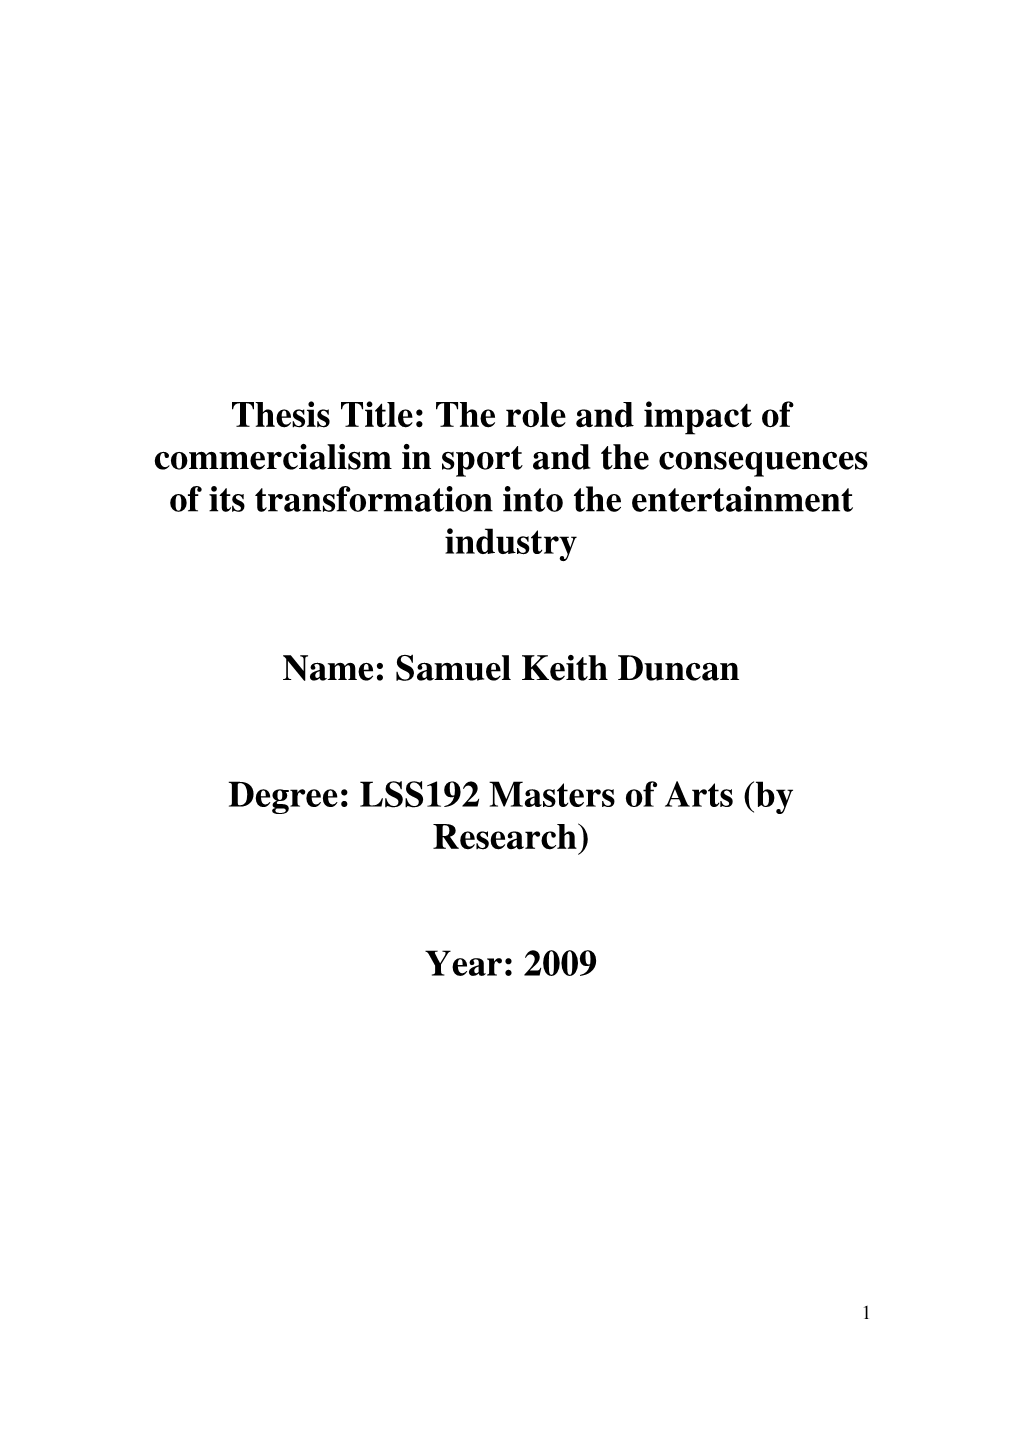 The Role and Impact of Commercialism in Sport and the Consequences of Its Transformation Into the Entertainment Industry